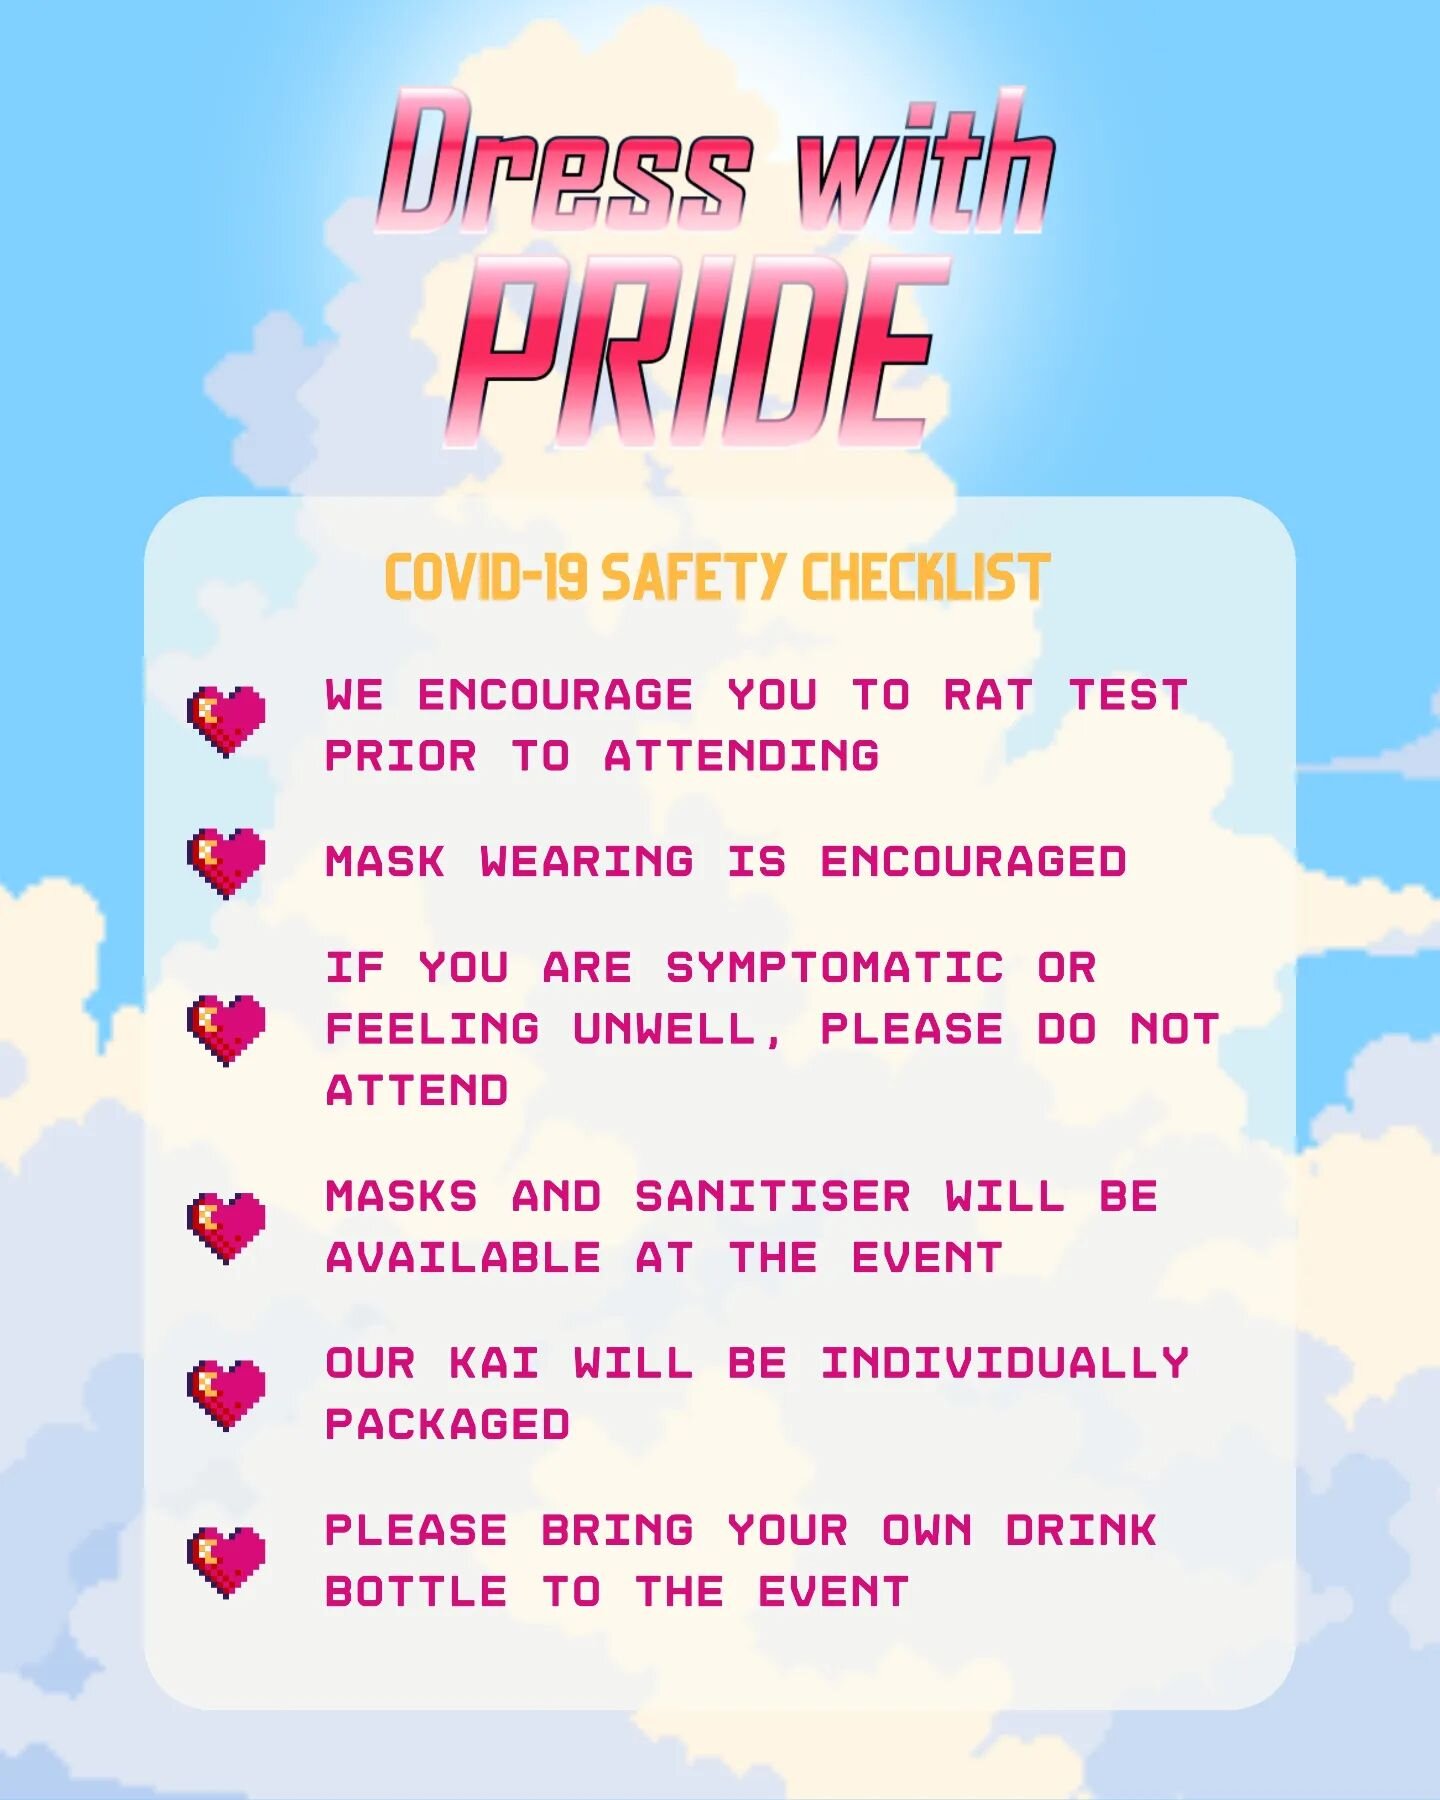 Happy Friday 🥳

As we enjoy all the wonderful events happening for Pride Month, it's super important that we do our part to keep each other safe. 

We've compiled a little Covid-19 safety checklist for you to follow while attending Dress with Pride 